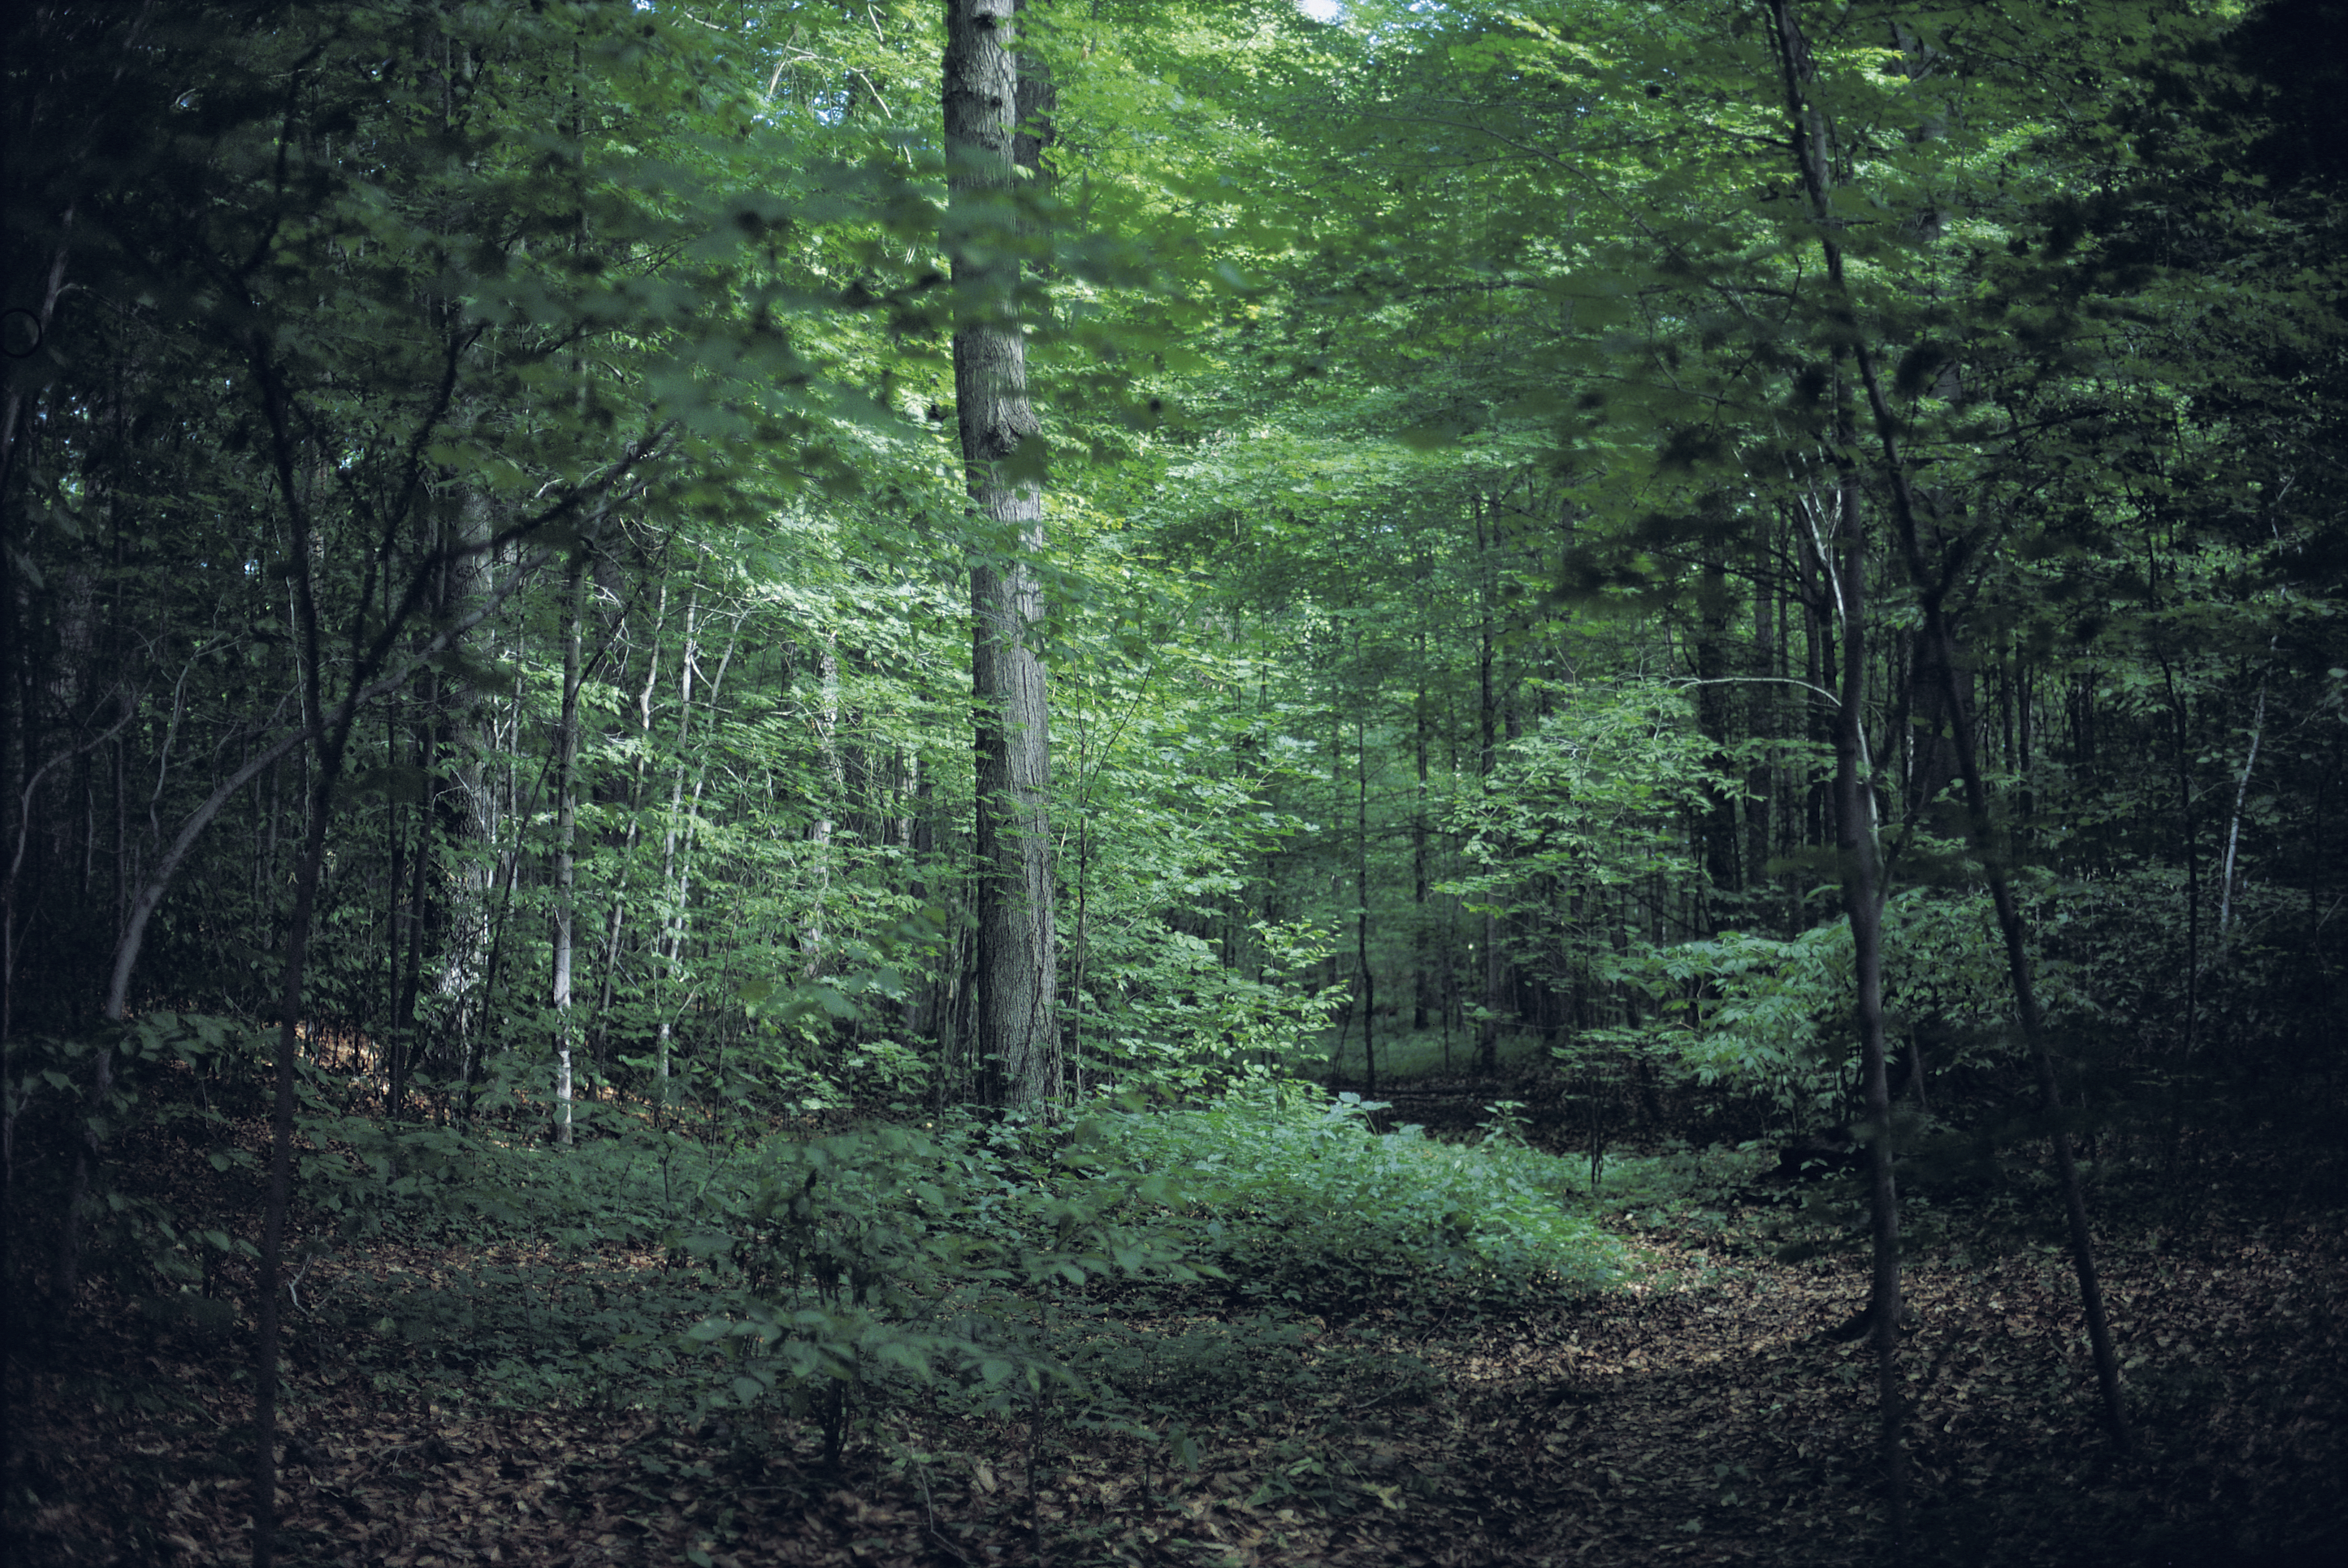 A photo of trees in the Sacred Grove in Palmyra, New York.